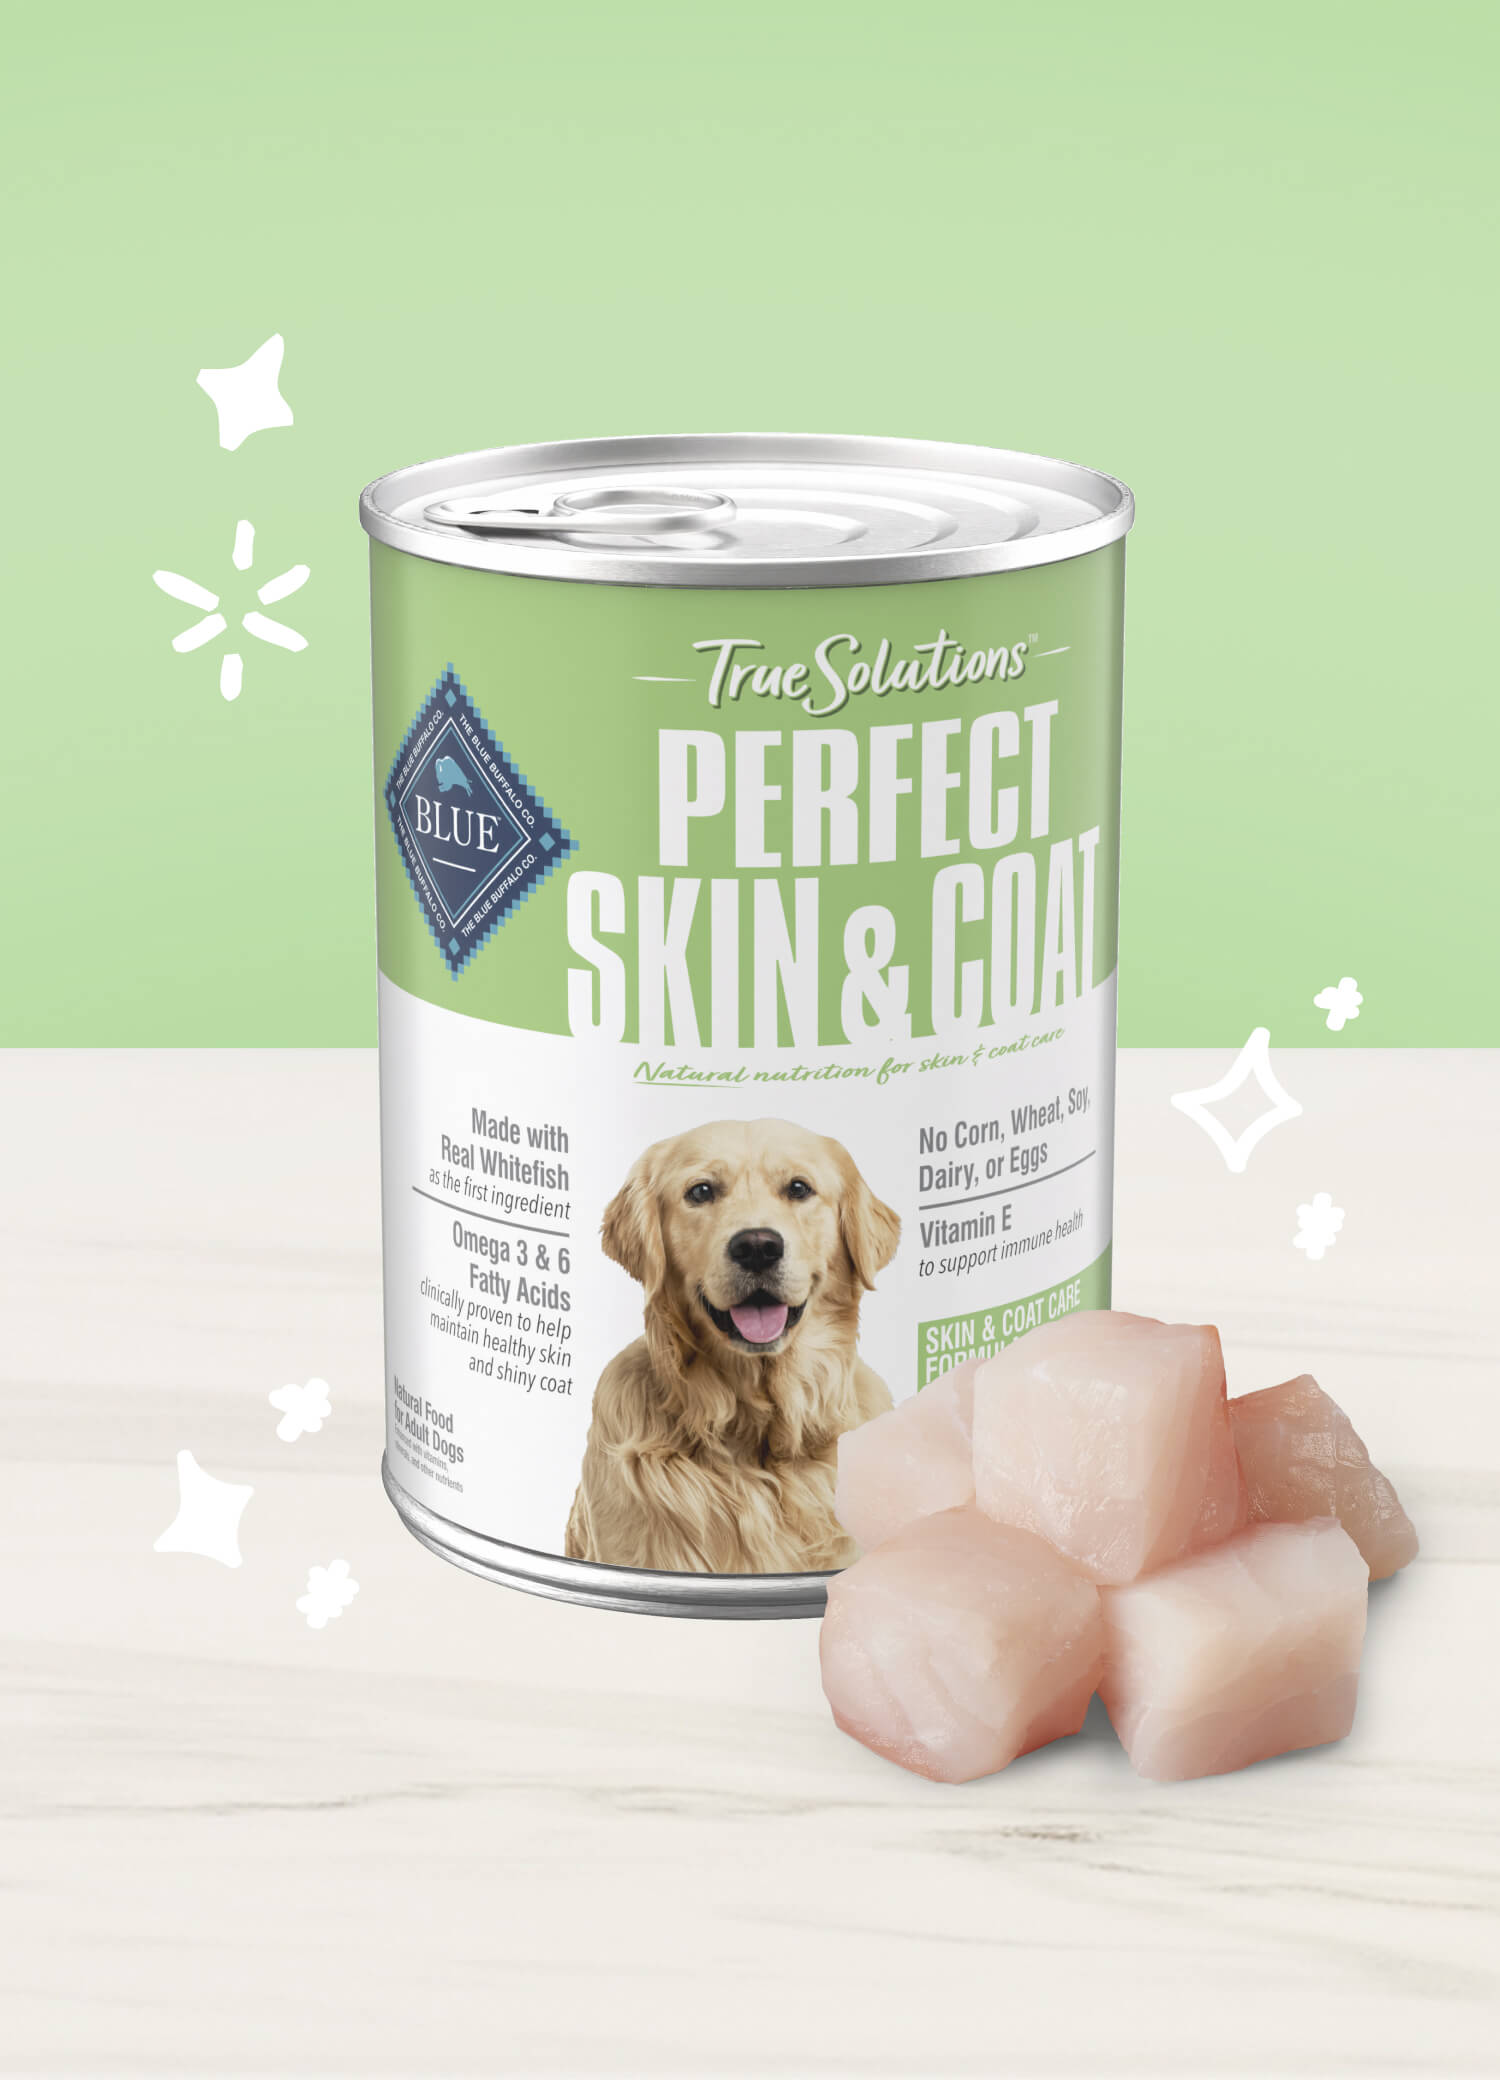 Blue true solutions perfect skin & coat care dog wet food